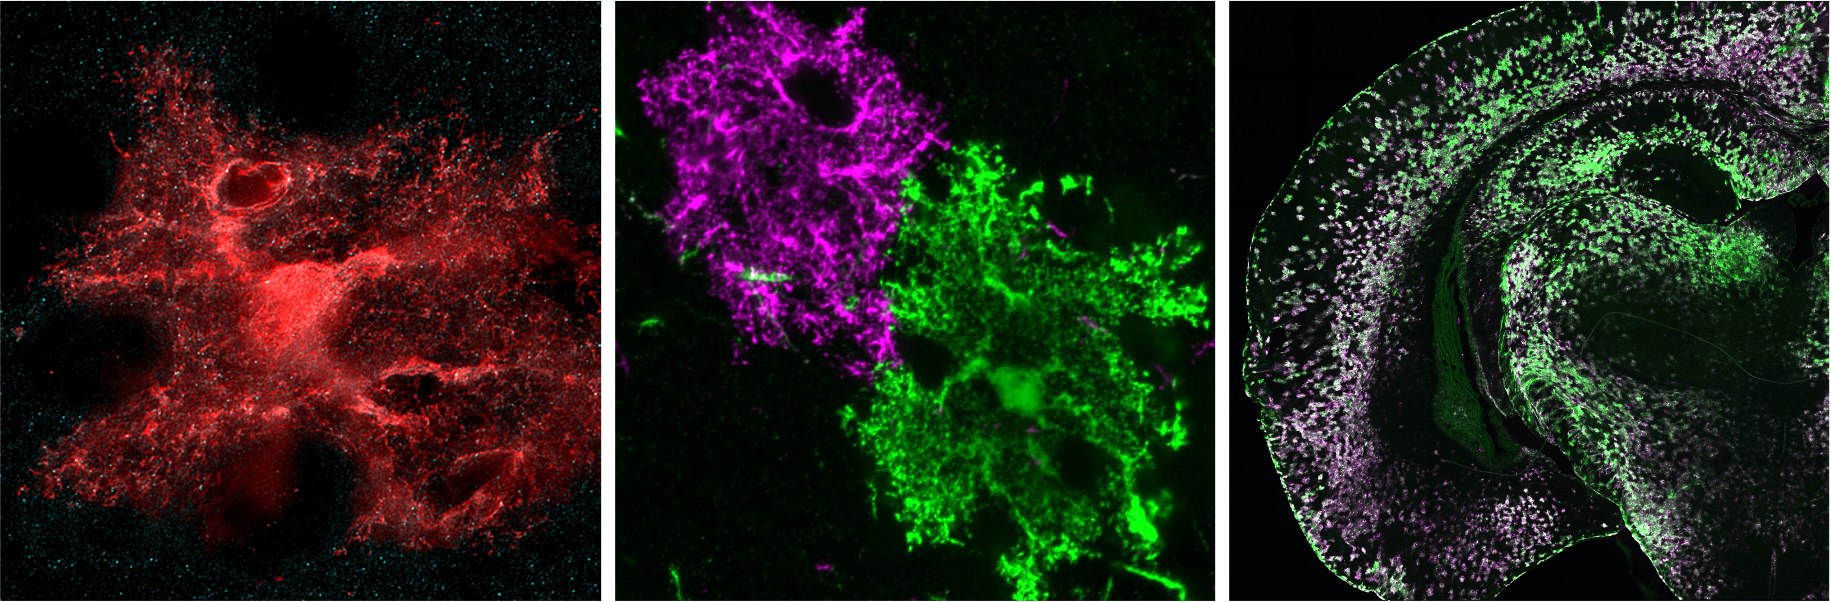 Different examples of astrocytes in the mouse brain with fluorescent labeling